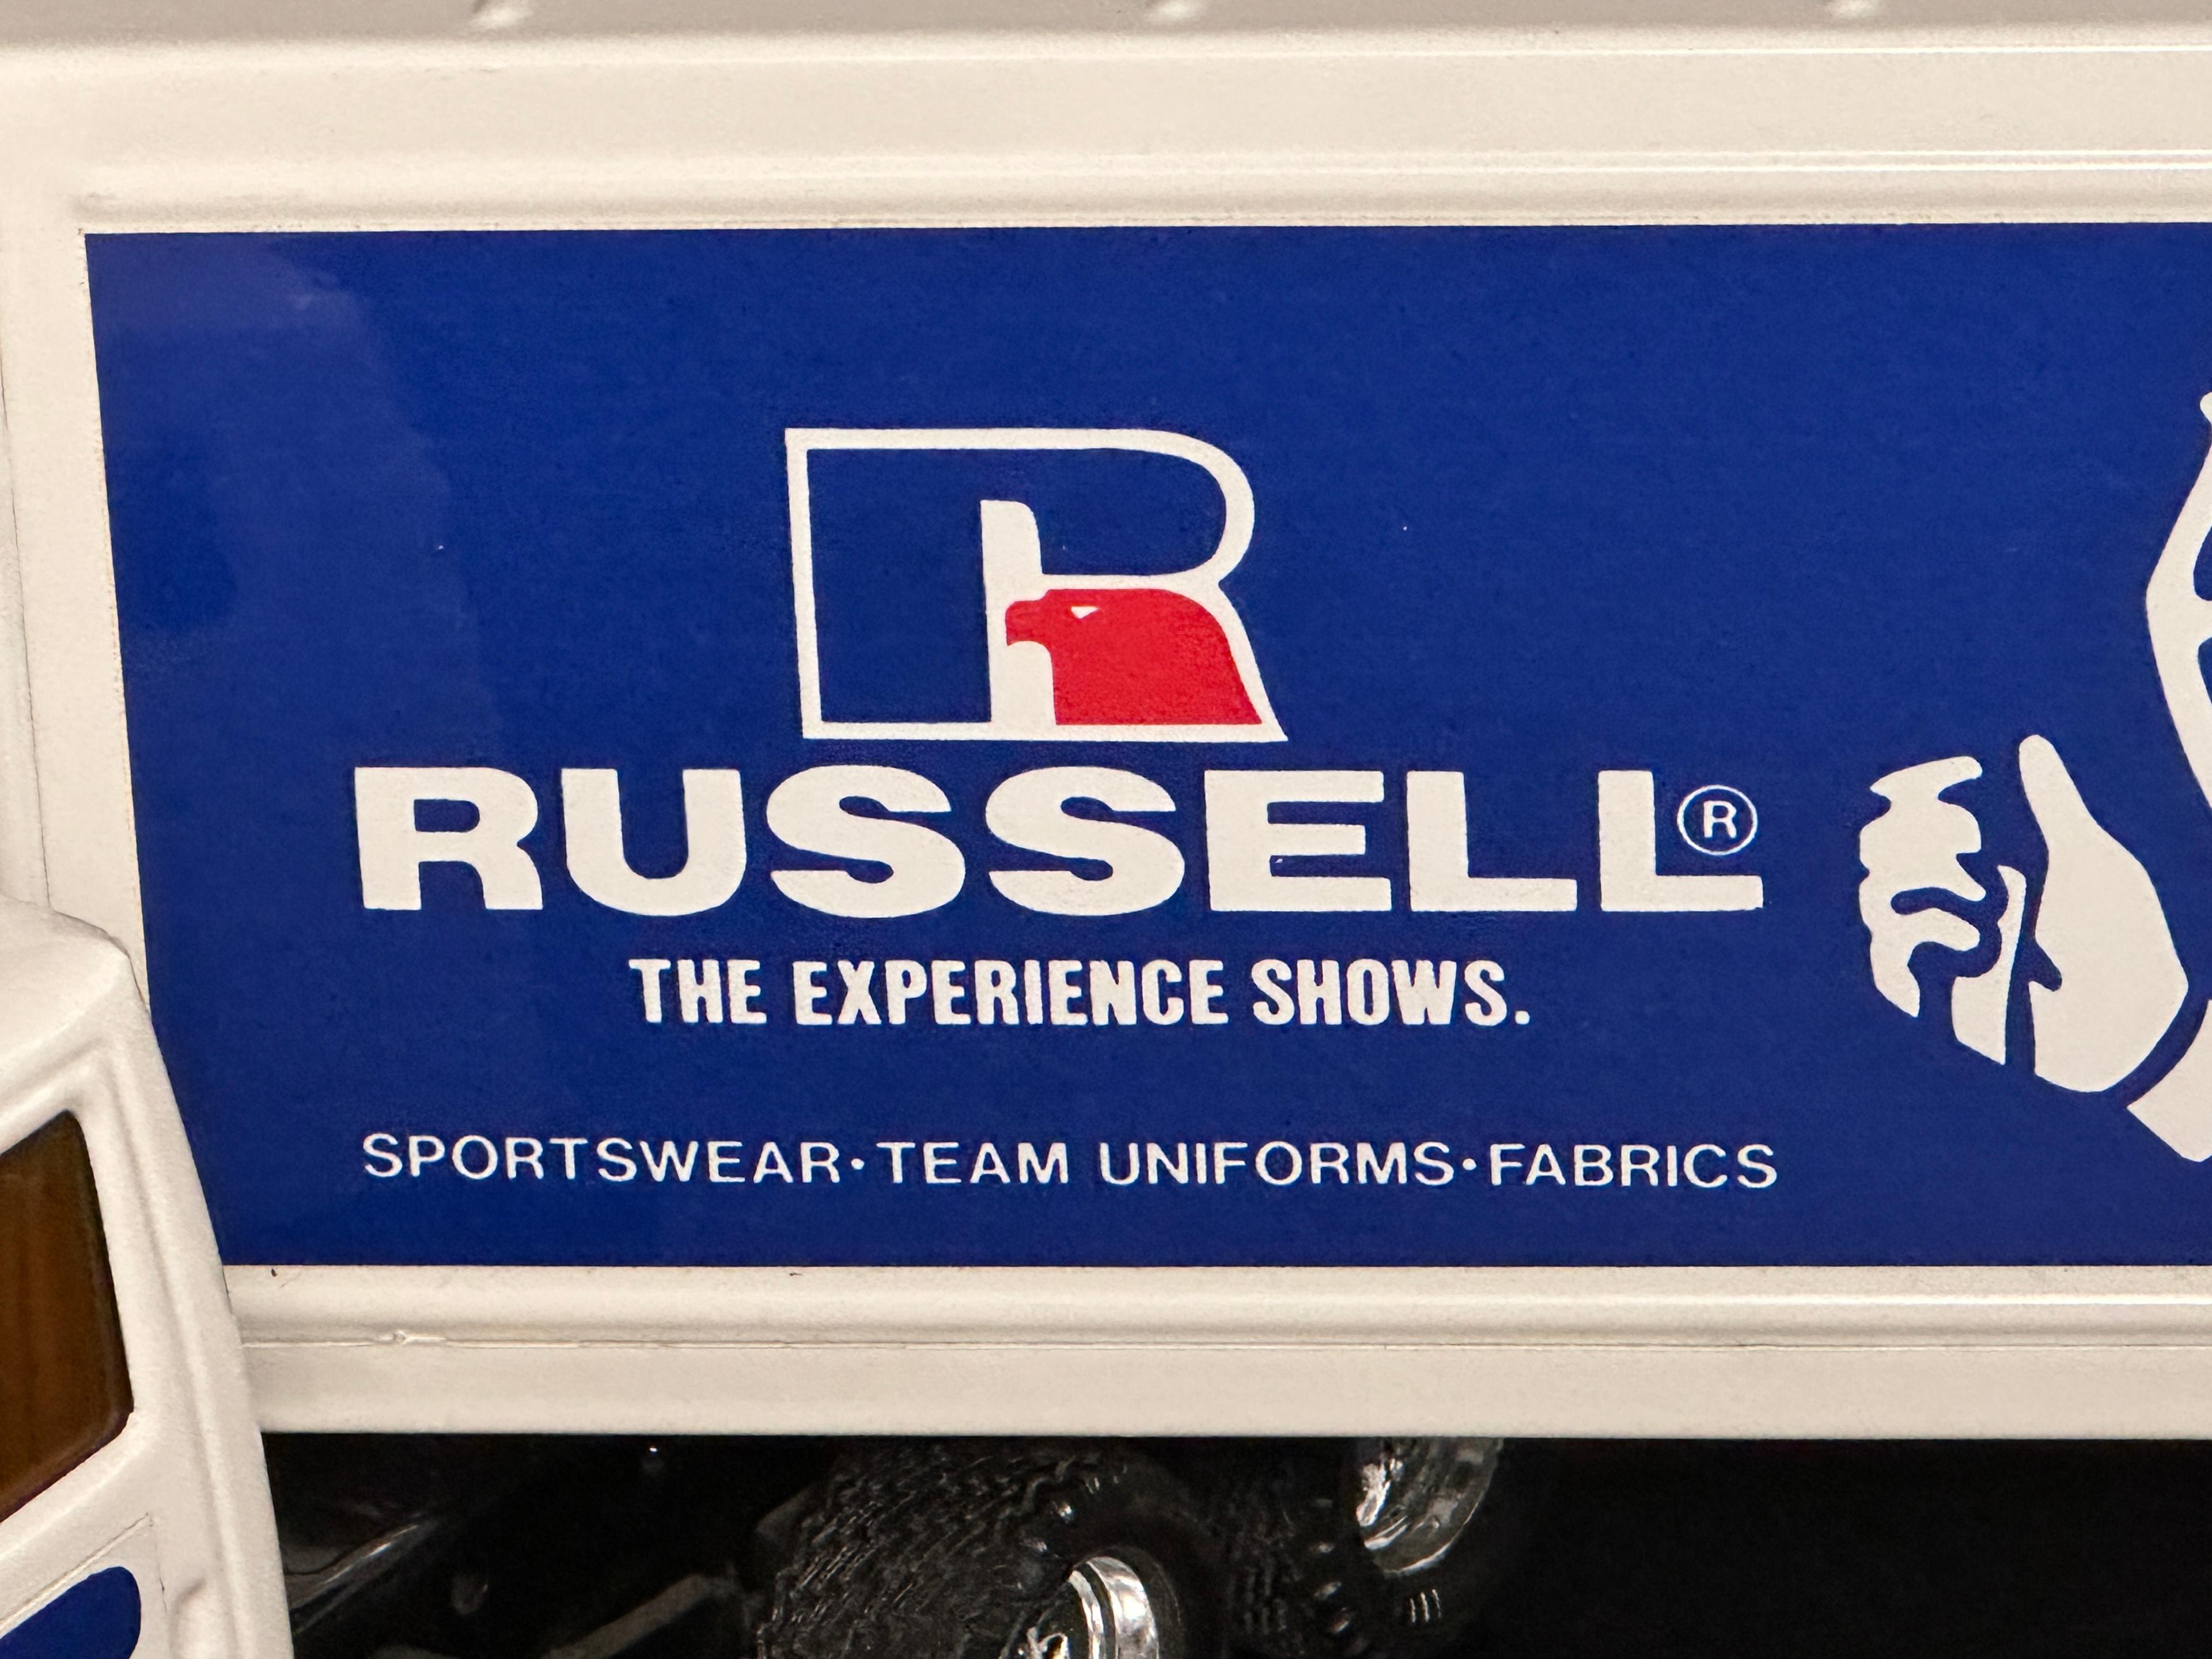 ERTL Russell Advertising Die Cast Truck and Trailer